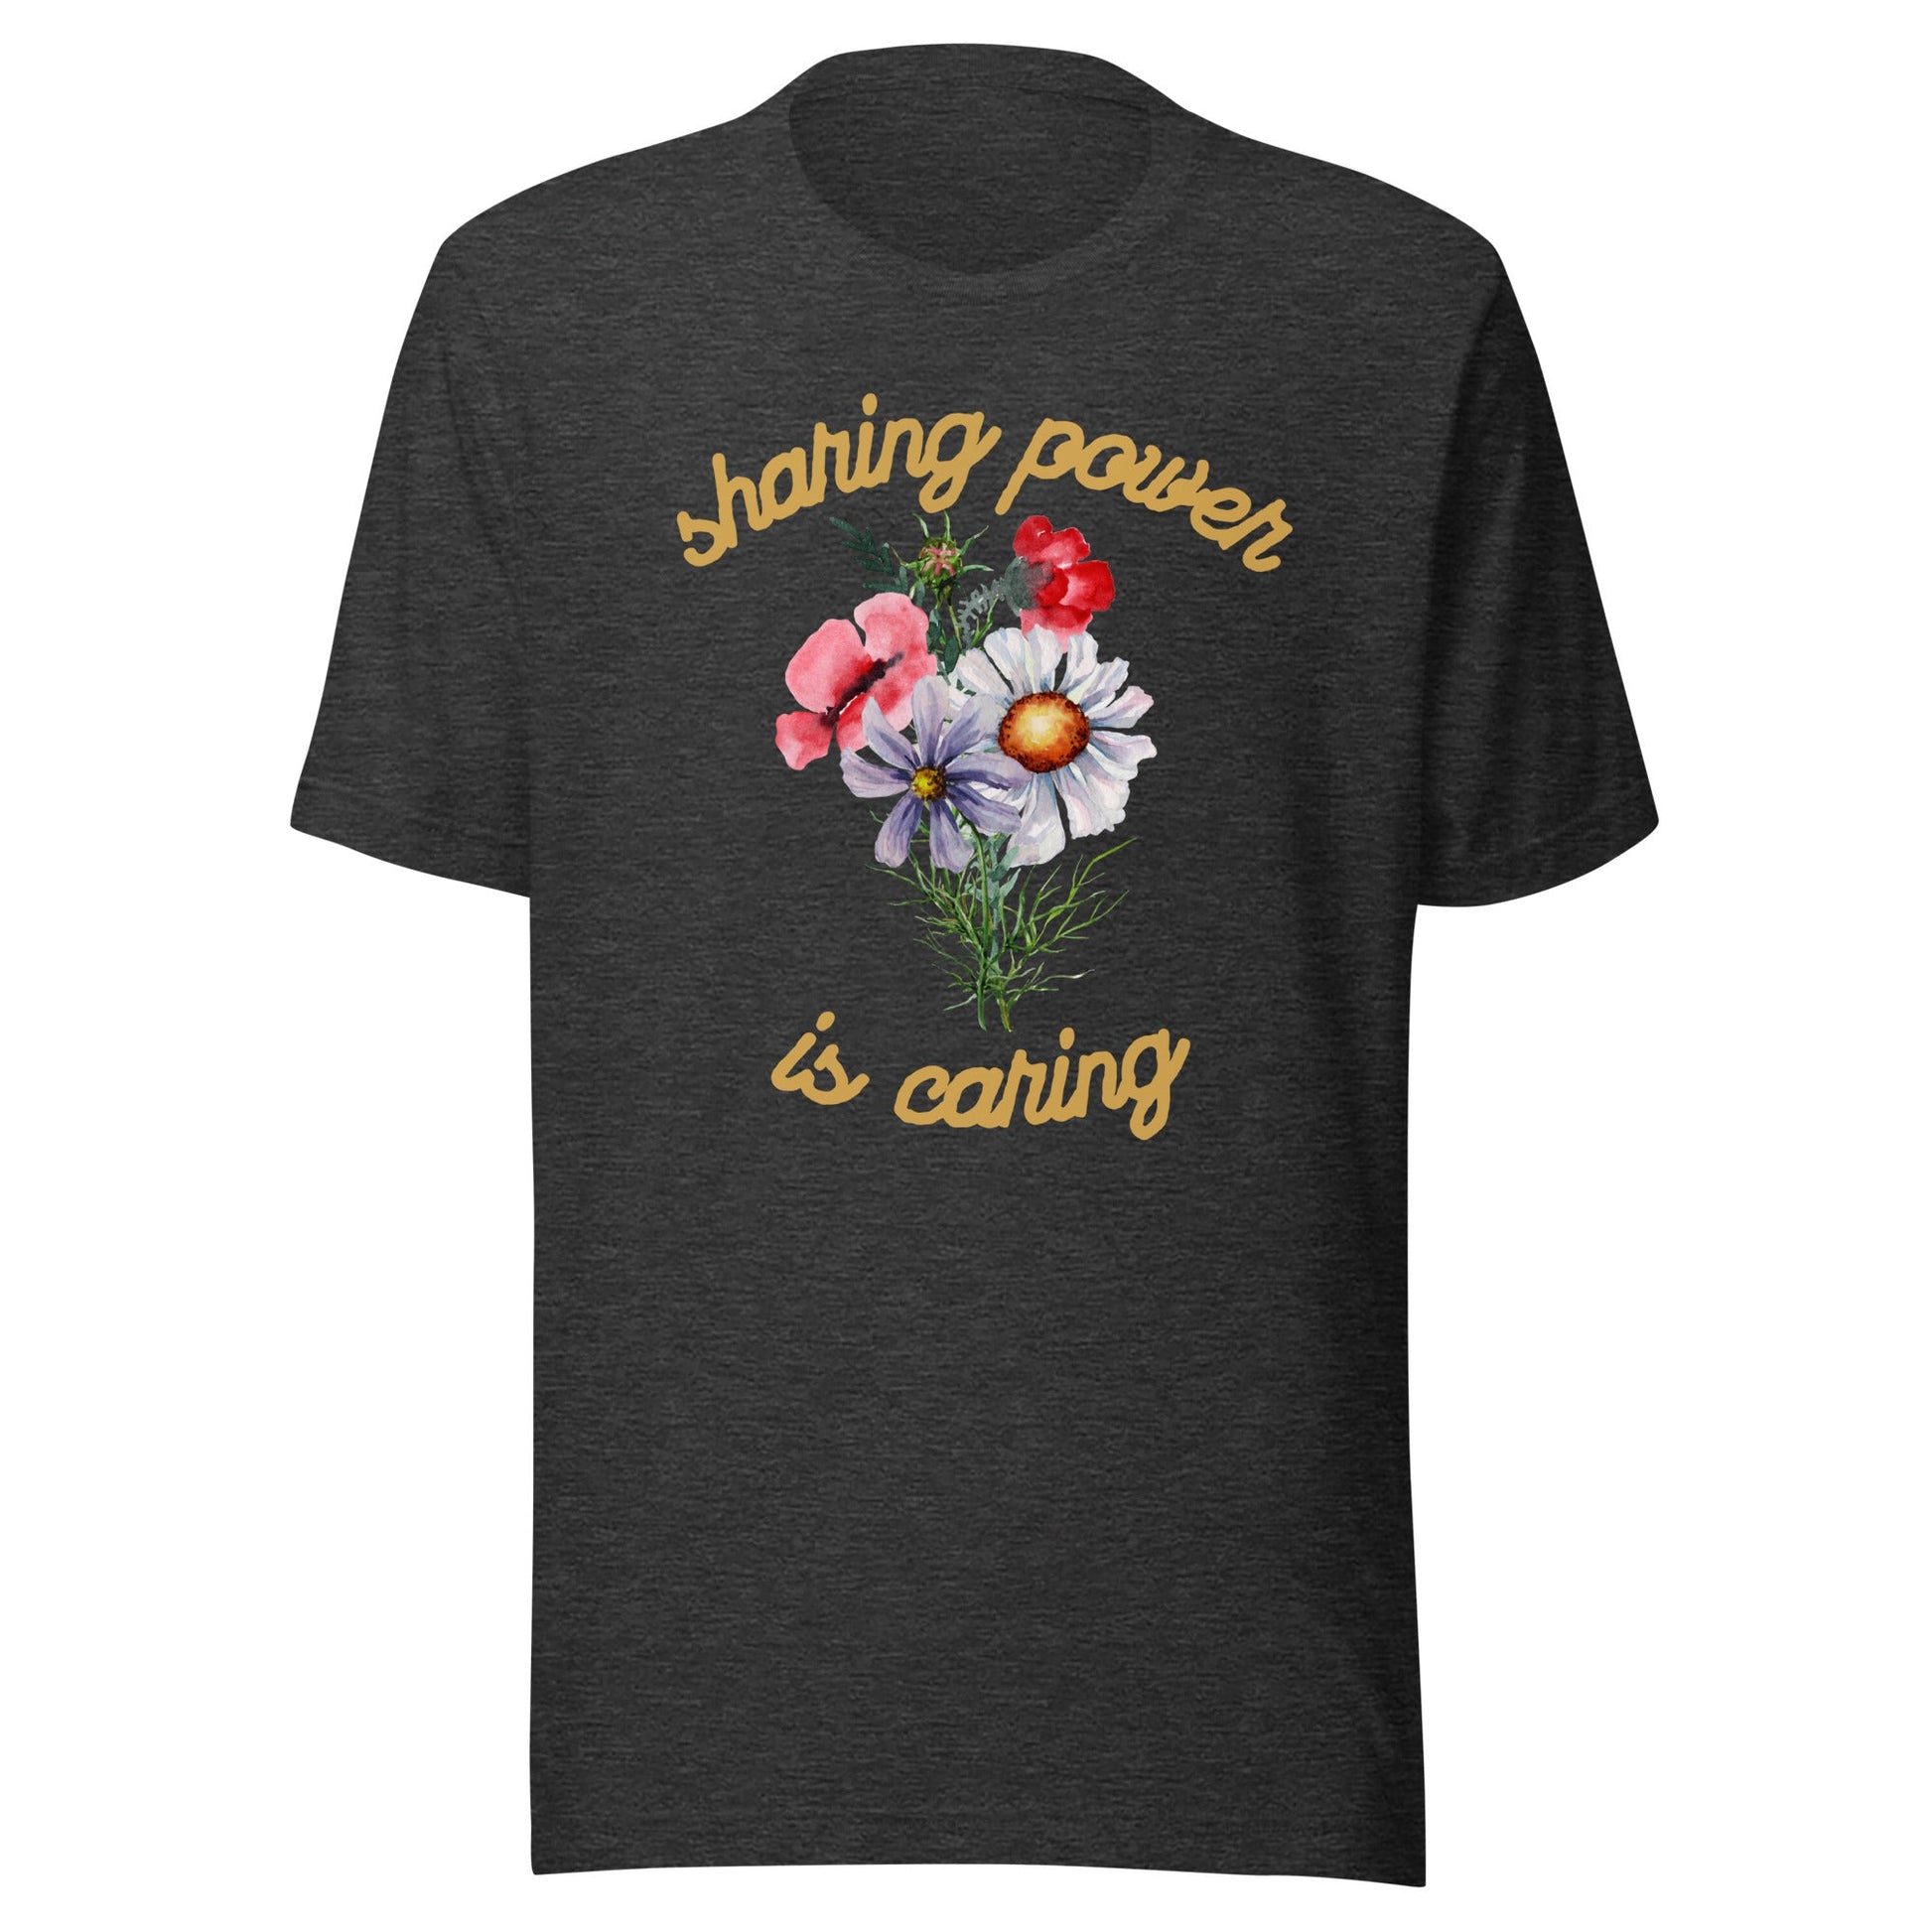 Sharing Power is Caring Floral Unisex t-shirt-recalciGrant